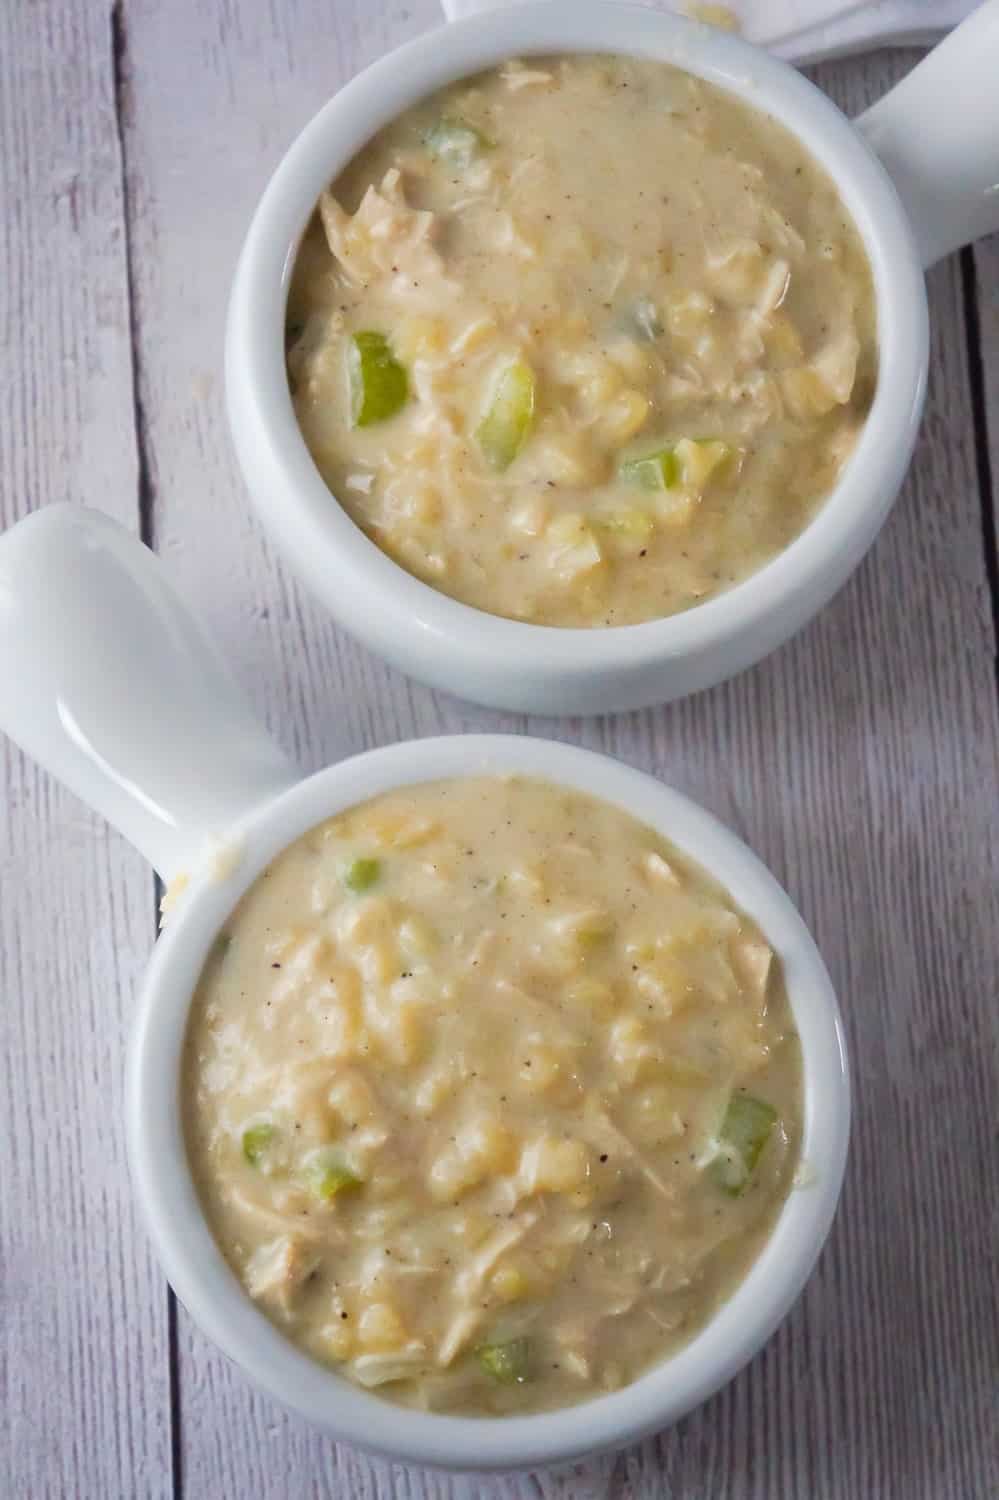 Creamy Chicken Noodle Soup is a hearty comfort food dish perfect for cold weather. This easy soup recipe is loaded with rotisserie chicken and alphabet noodles.